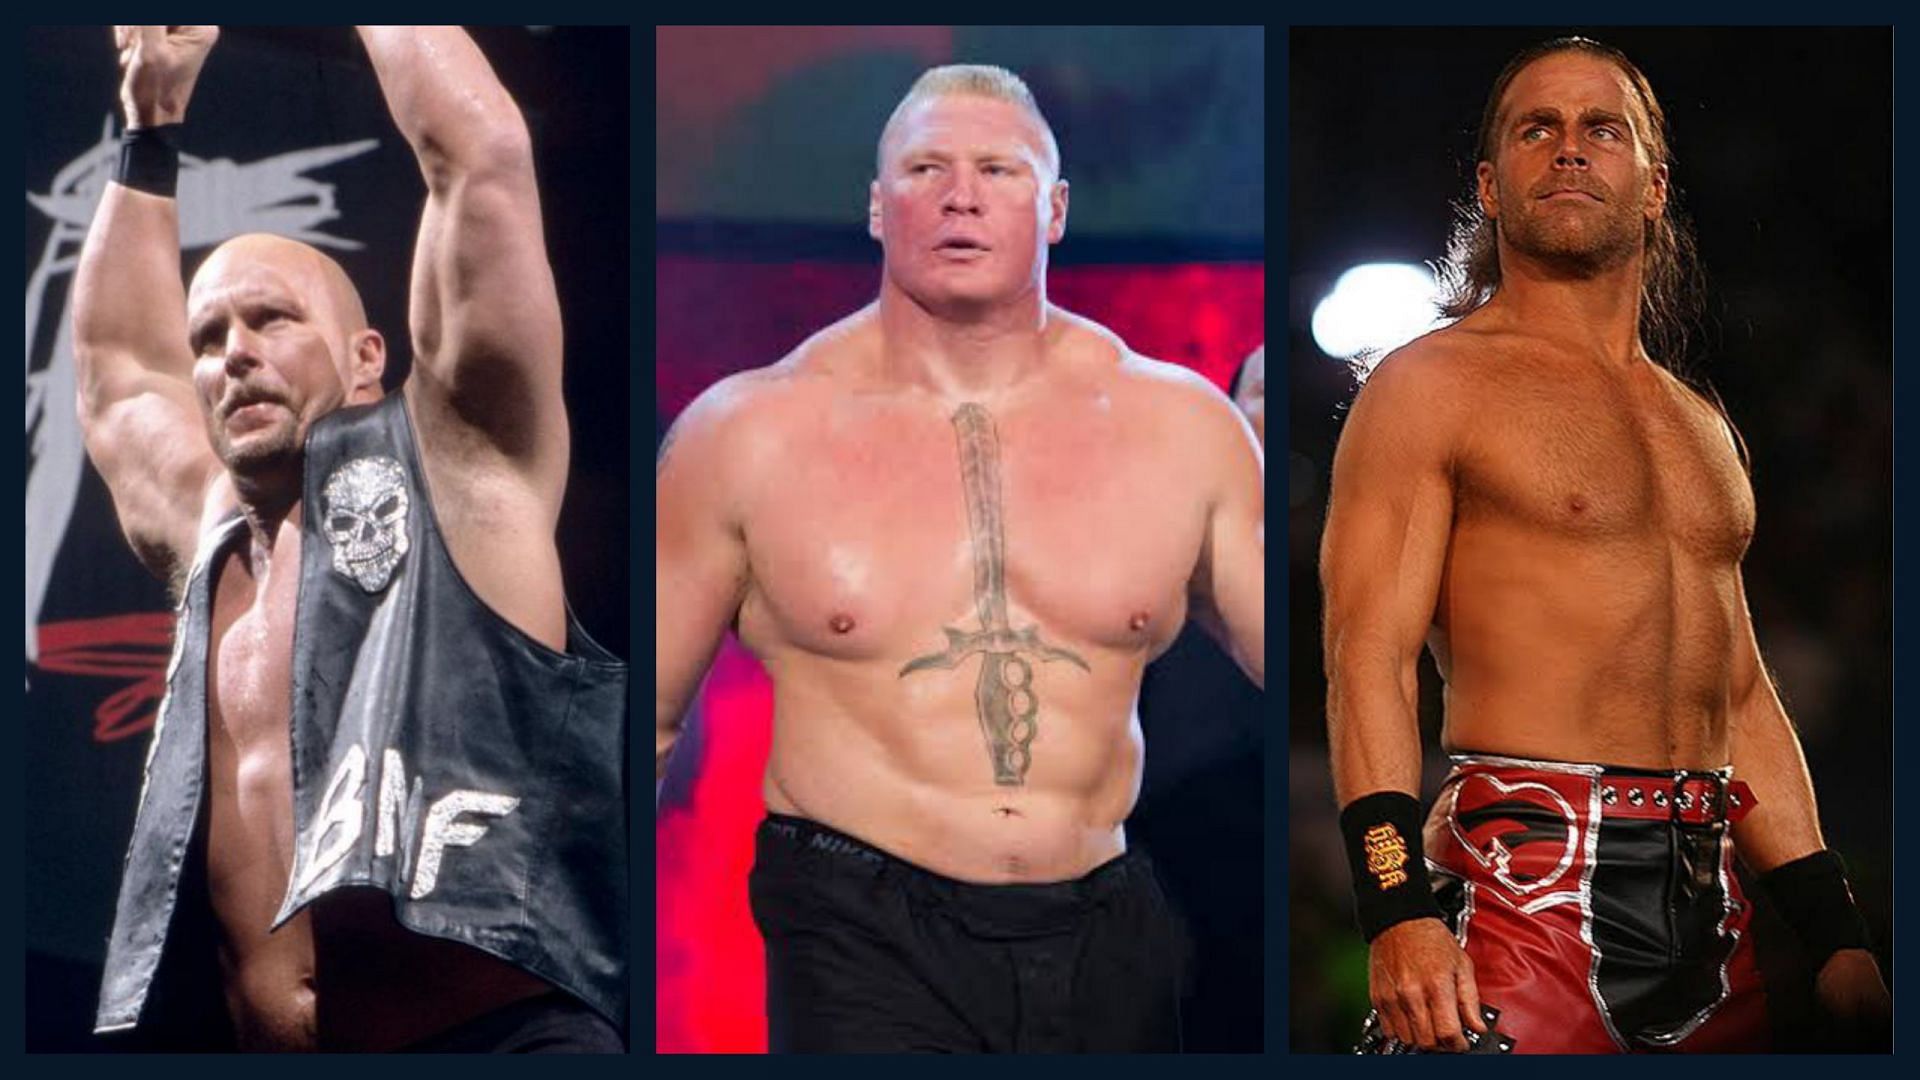 These superstars will likely never compete against Brock Lesnar.